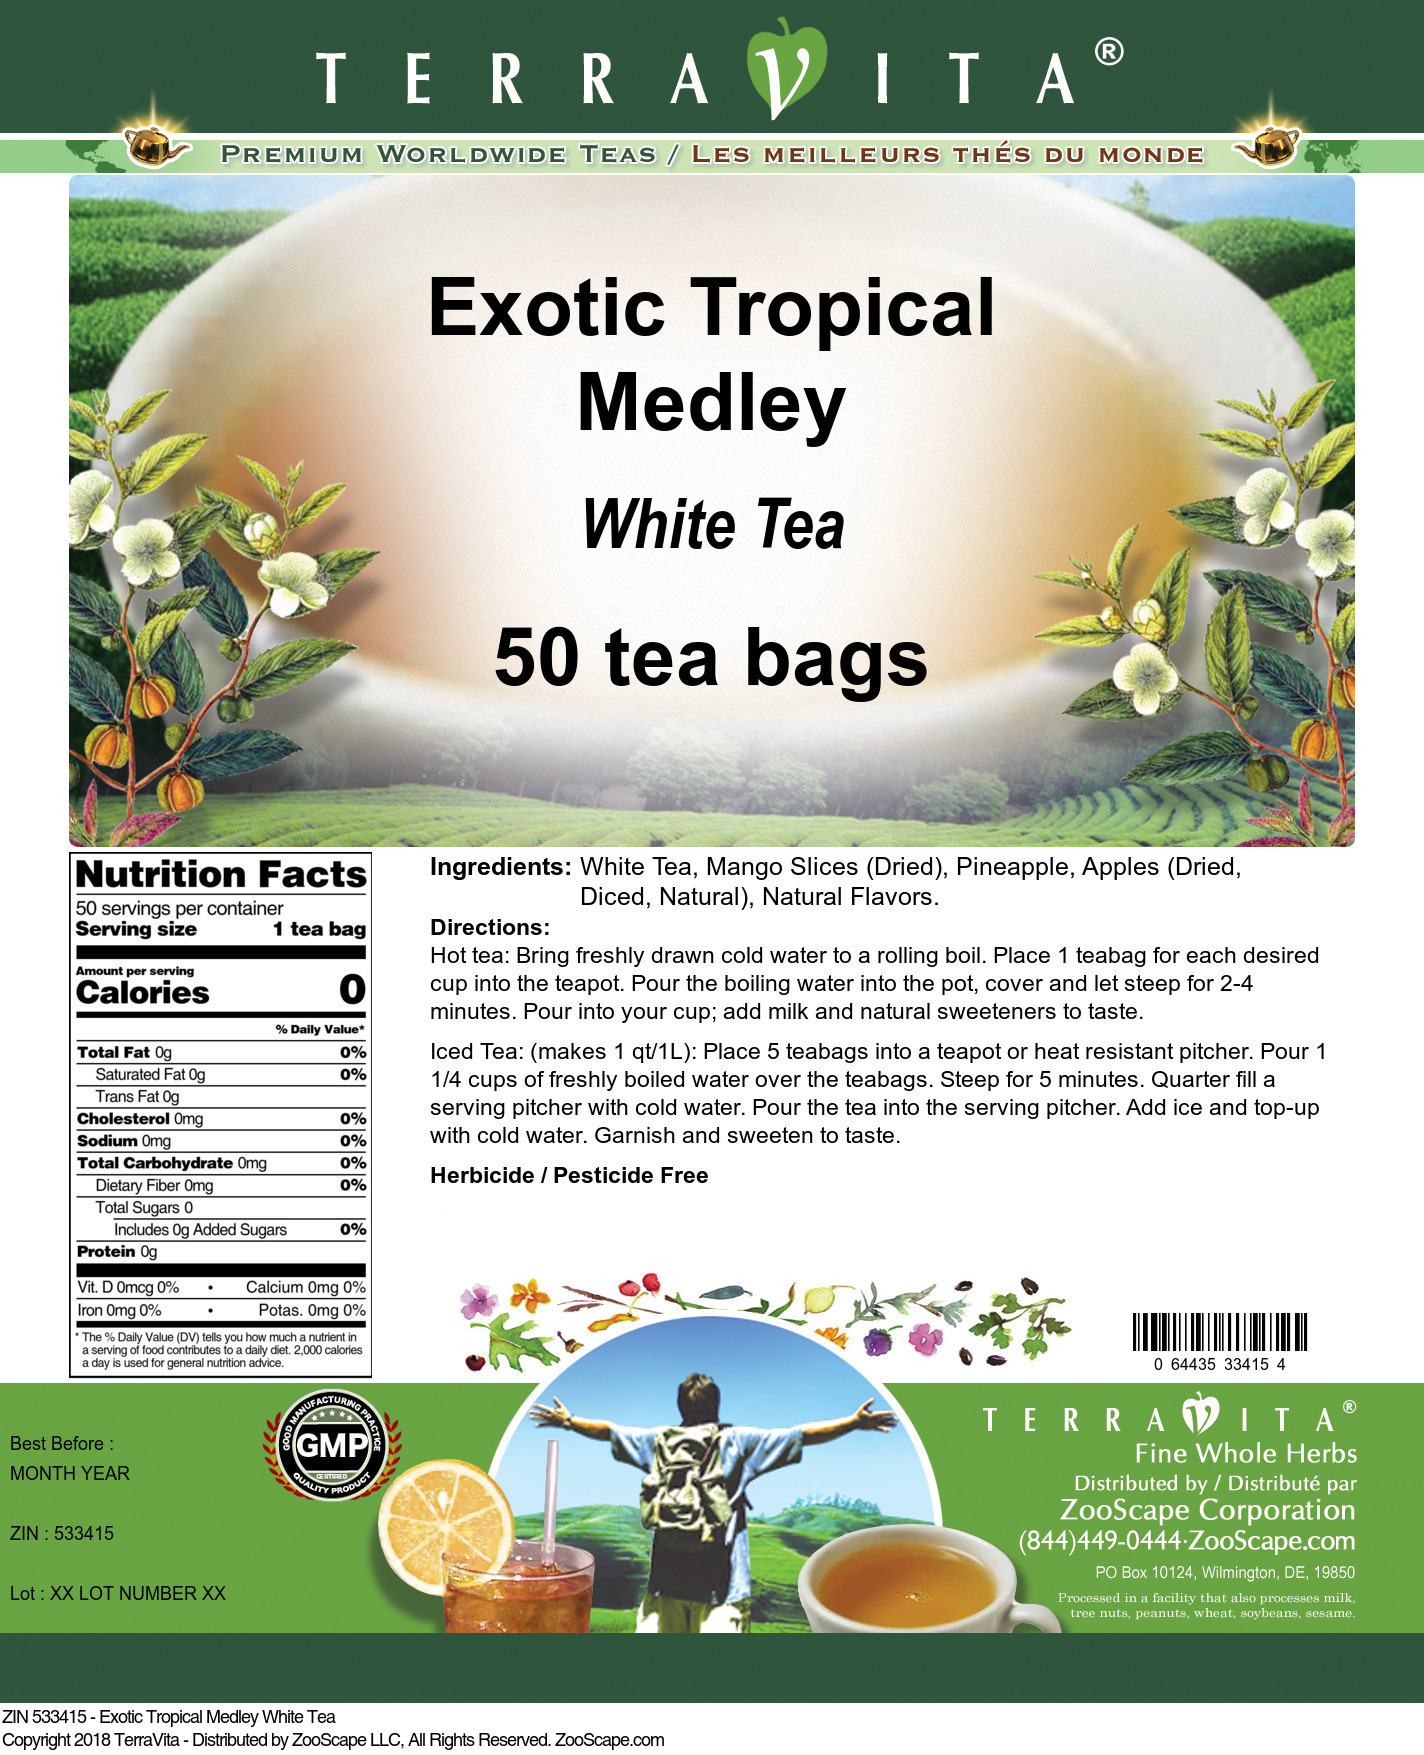 Exotic Tropical Medley White Tea - Label